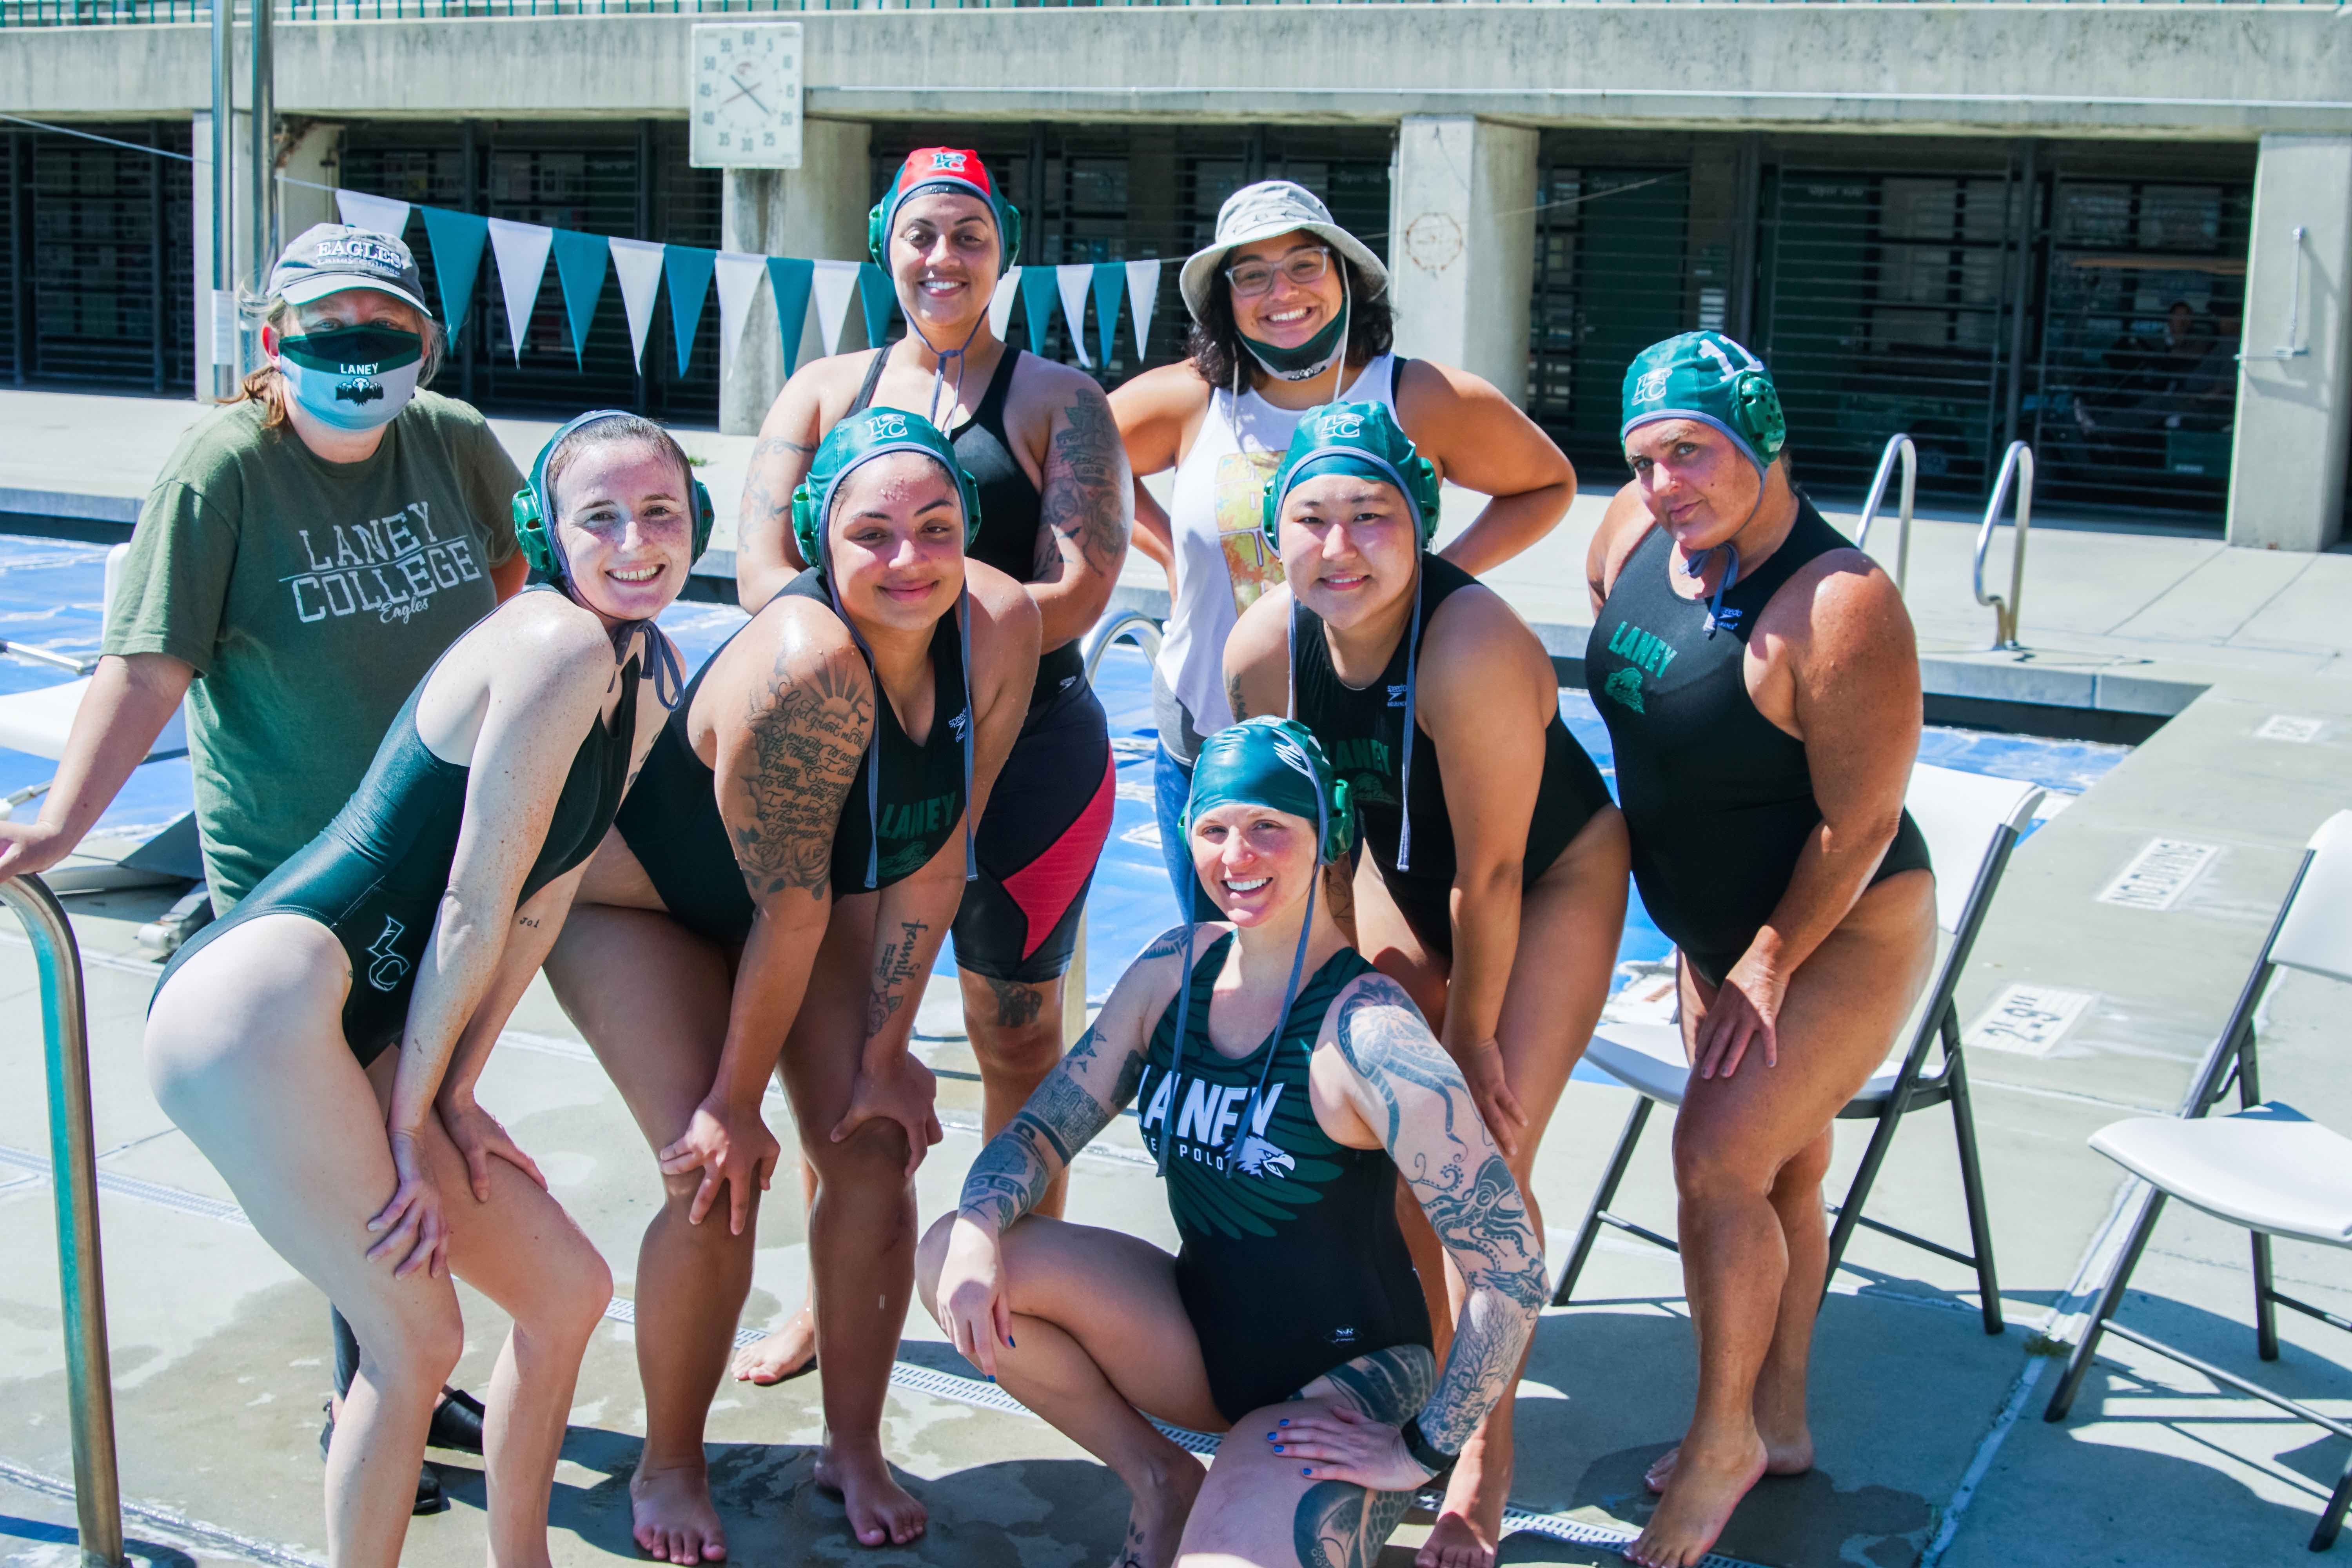 Laney College Water Polo Team 2021